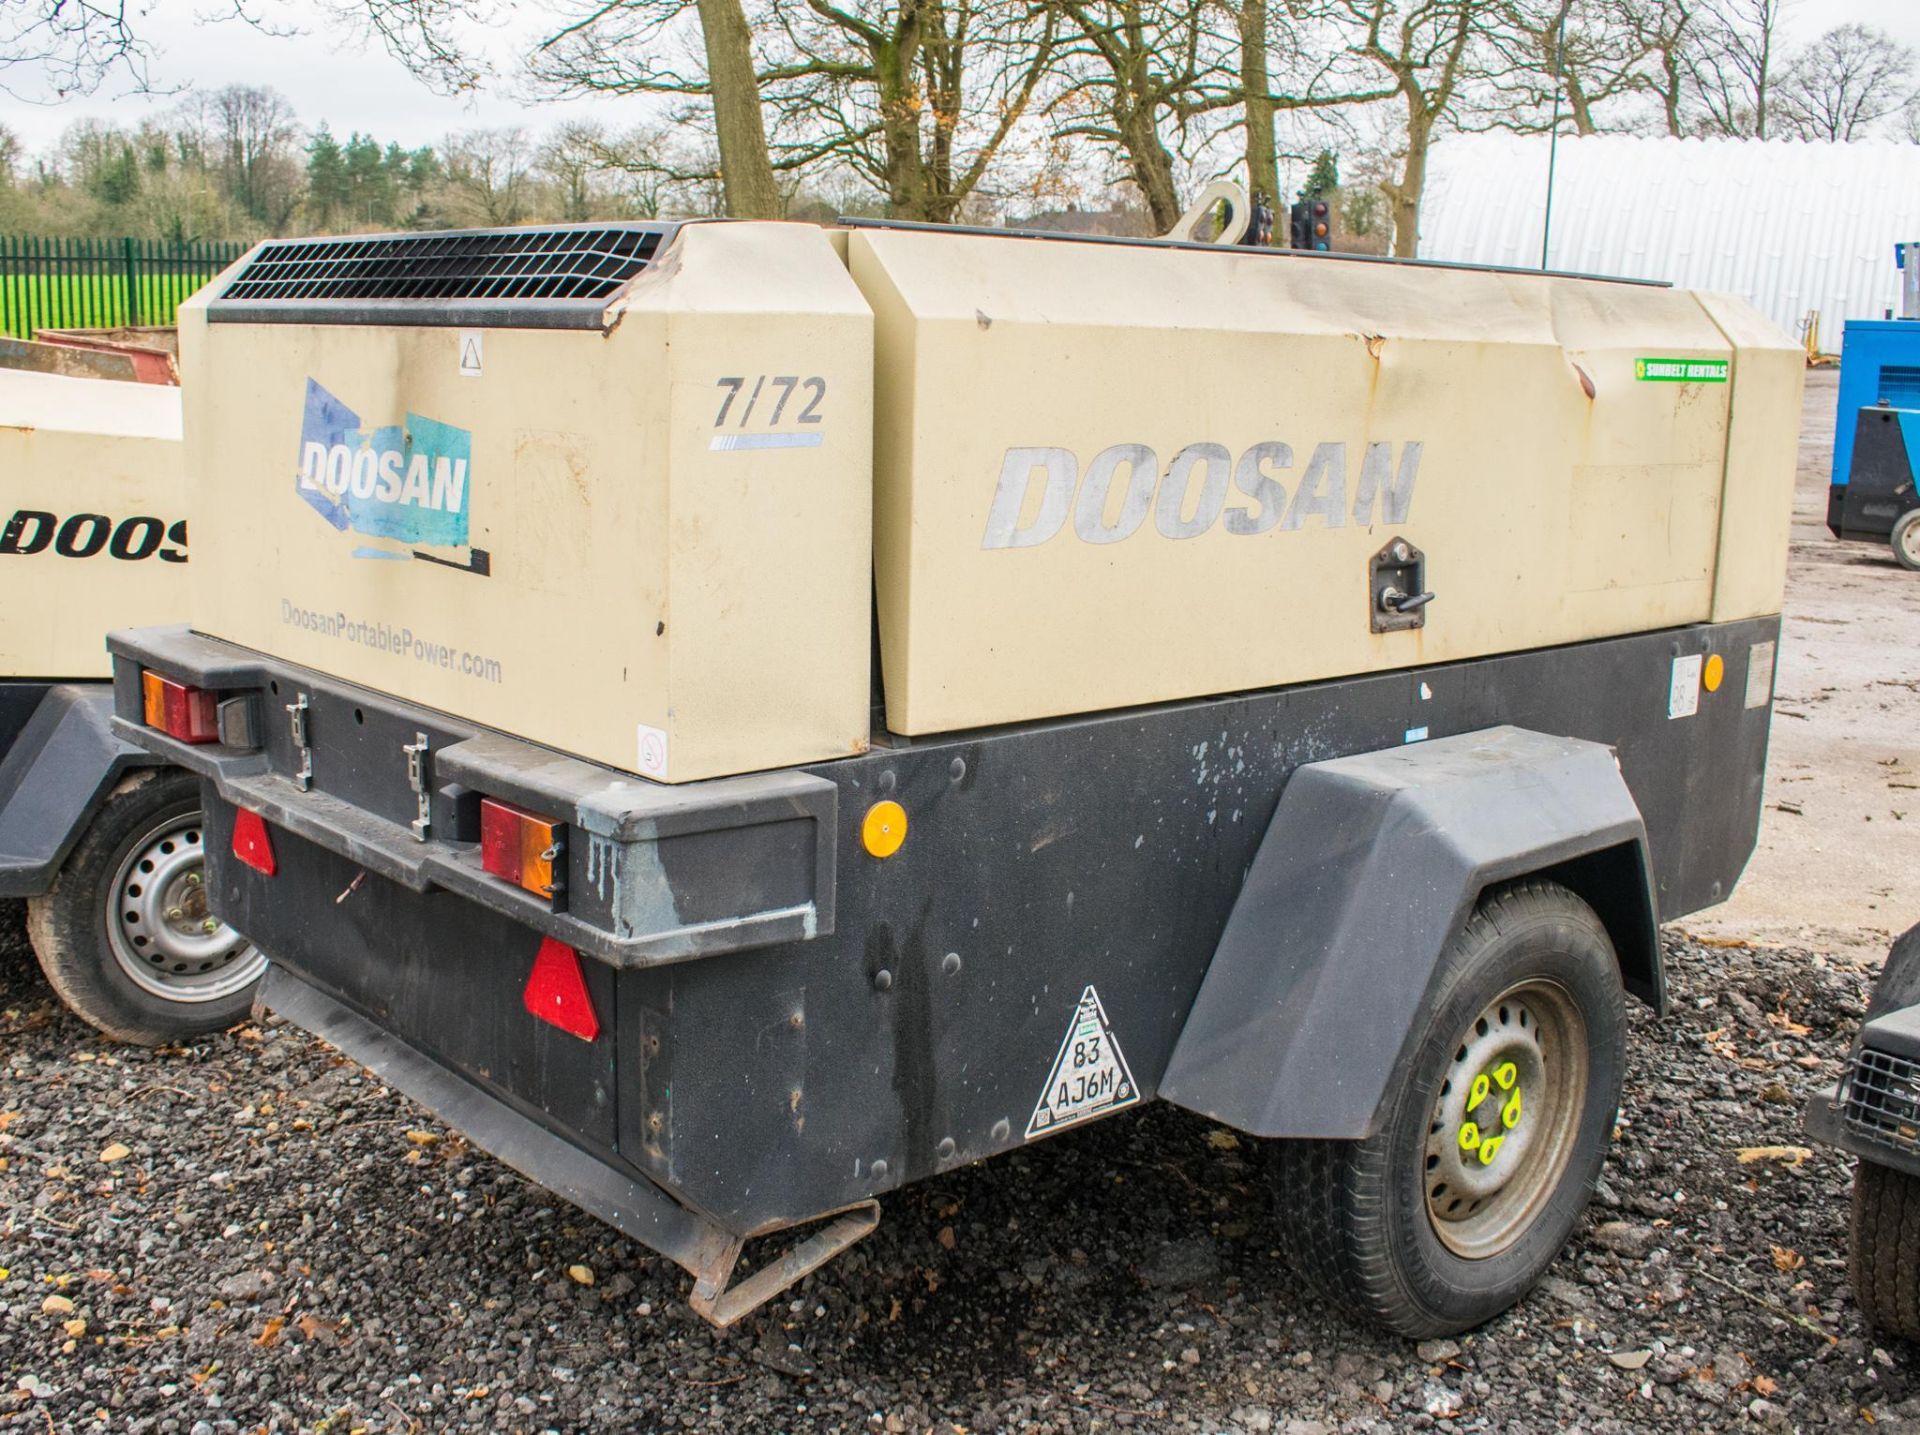 Doosan 7/72 diesel driven fast tow mobile air compressor Year: 2014 S/N: 542104 Recorded Hours: 1391 - Image 2 of 6